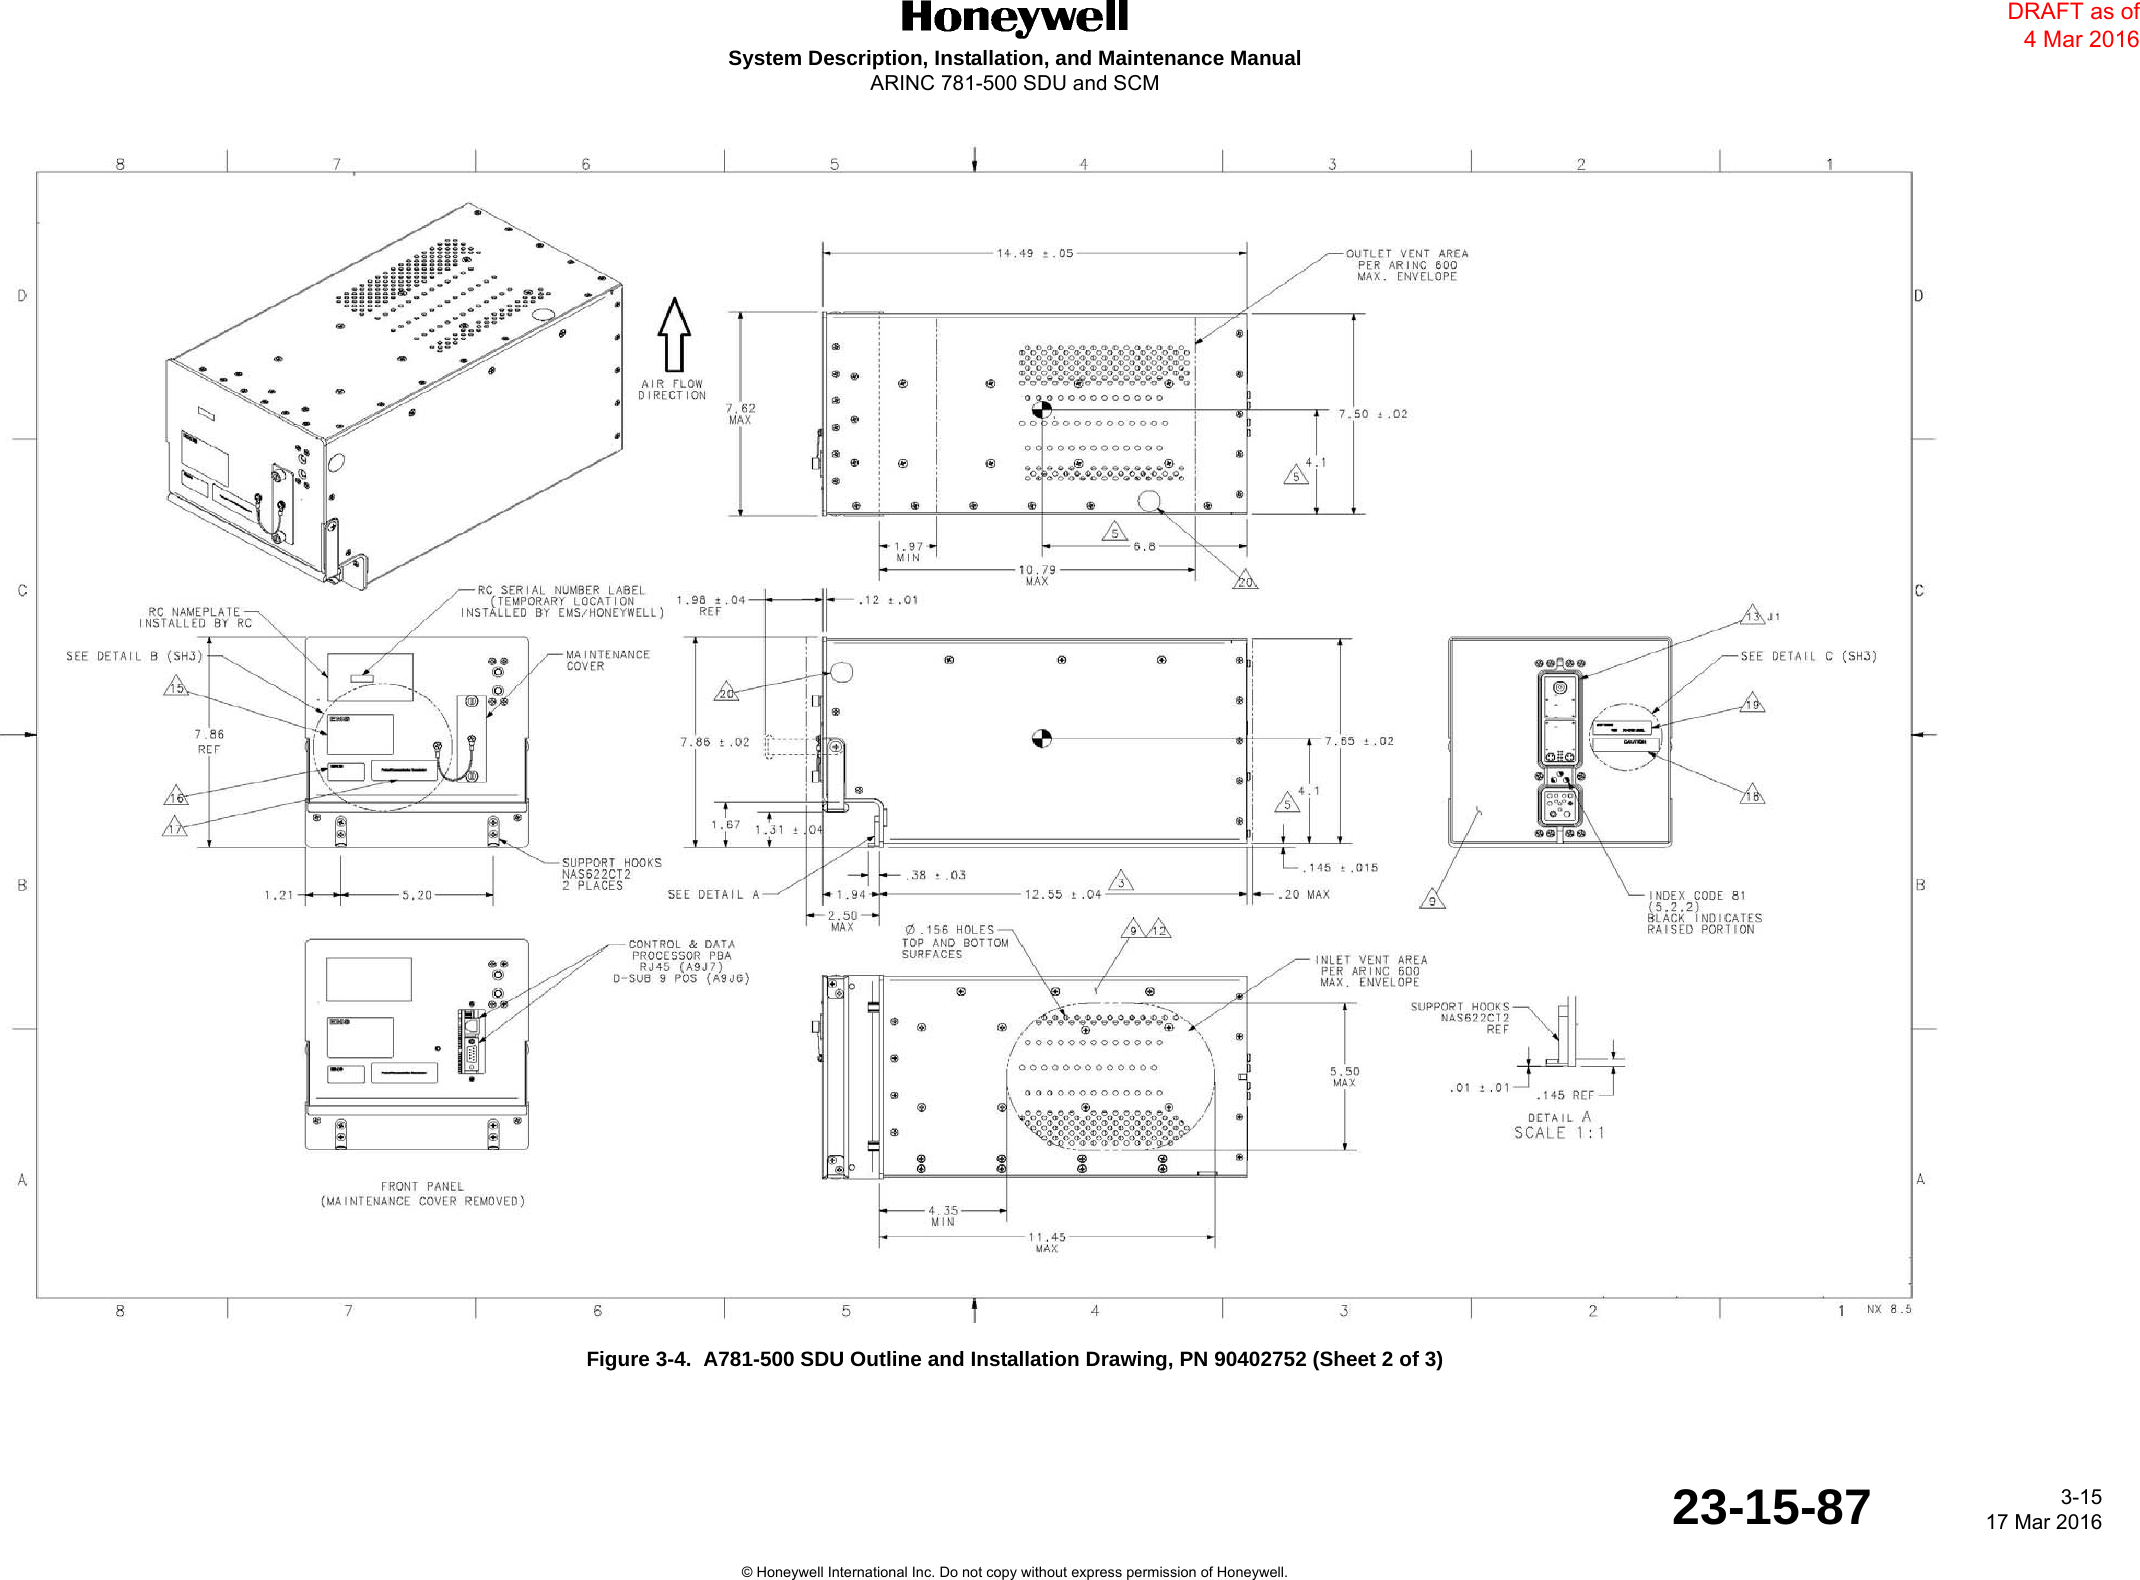 DRAFTSystem Description, Installation, and Maintenance ManualARINC 781-500 SDU and SCM 3-1517 Mar 201623-15-87© Honeywell International Inc. Do not copy without express permission of Honeywell.Figure 3-4.  A781-500 SDU Outline and Installation Drawing, PN 90402752 (Sheet 2 of 3)DRAFT as of 4 Mar 2016